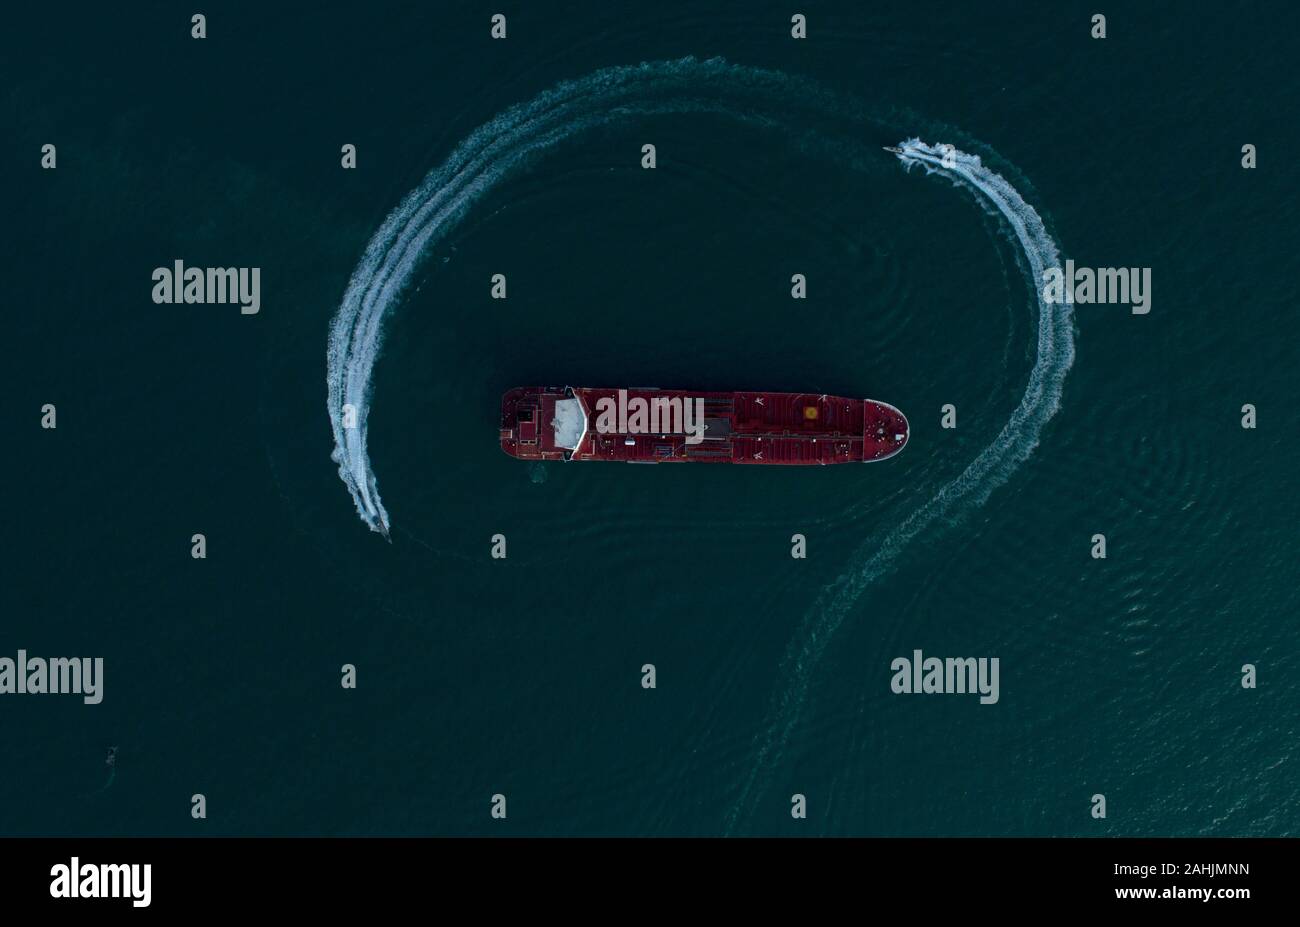 (191230) -- BEIJING, Dec. 30, 2019 (Xinhua) -- The photo released on July 21, 2019 shows the British oil tanker 'Stena Impero' surrounded by speedboats of Iran's Islamic Revolution Guard Corps (IRGC) in the Strait of Hormuz, Iran. Two hot potatoes in the chaotic Middle East   Under 'maximum pressure' from the United States, Iran has since May gradually stopped implementing parts of its commitment to the 2015 nuclear deal, also known as the Joint Comprehensive Plan of Action. In the meantime, a number of oil tankers have been attacked or detained in the Gulf and a U.S. drone was shot down. The Stock Photo